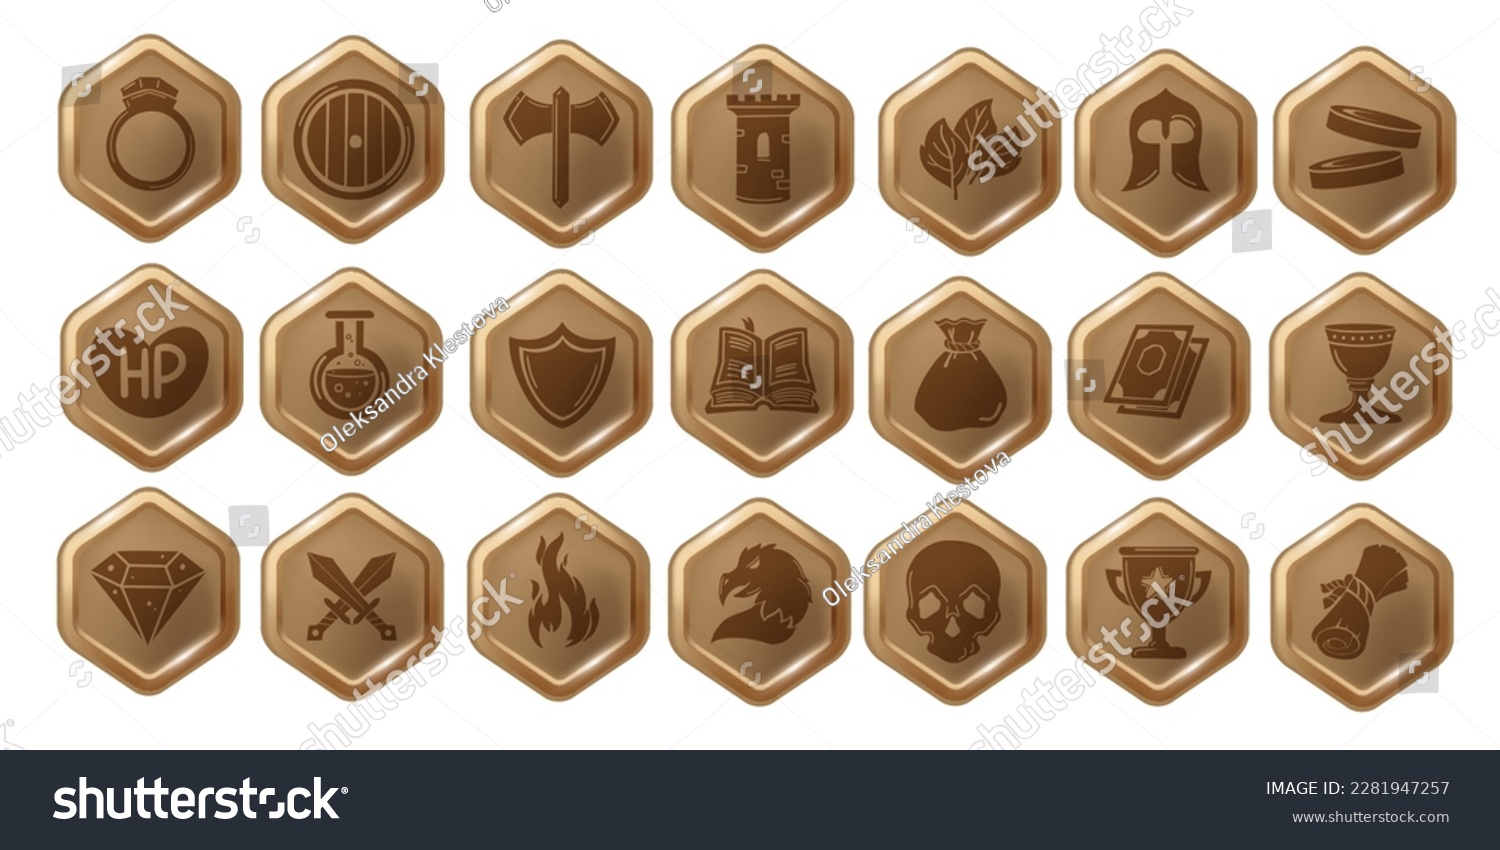 SVG of RPG game icon set, hexagon UI badge kit, mobile app button collection, vector health heal sign. Dungeon dragon entertainment concept, skill award, knight sword, magician potion. RPG icon pictogram svg